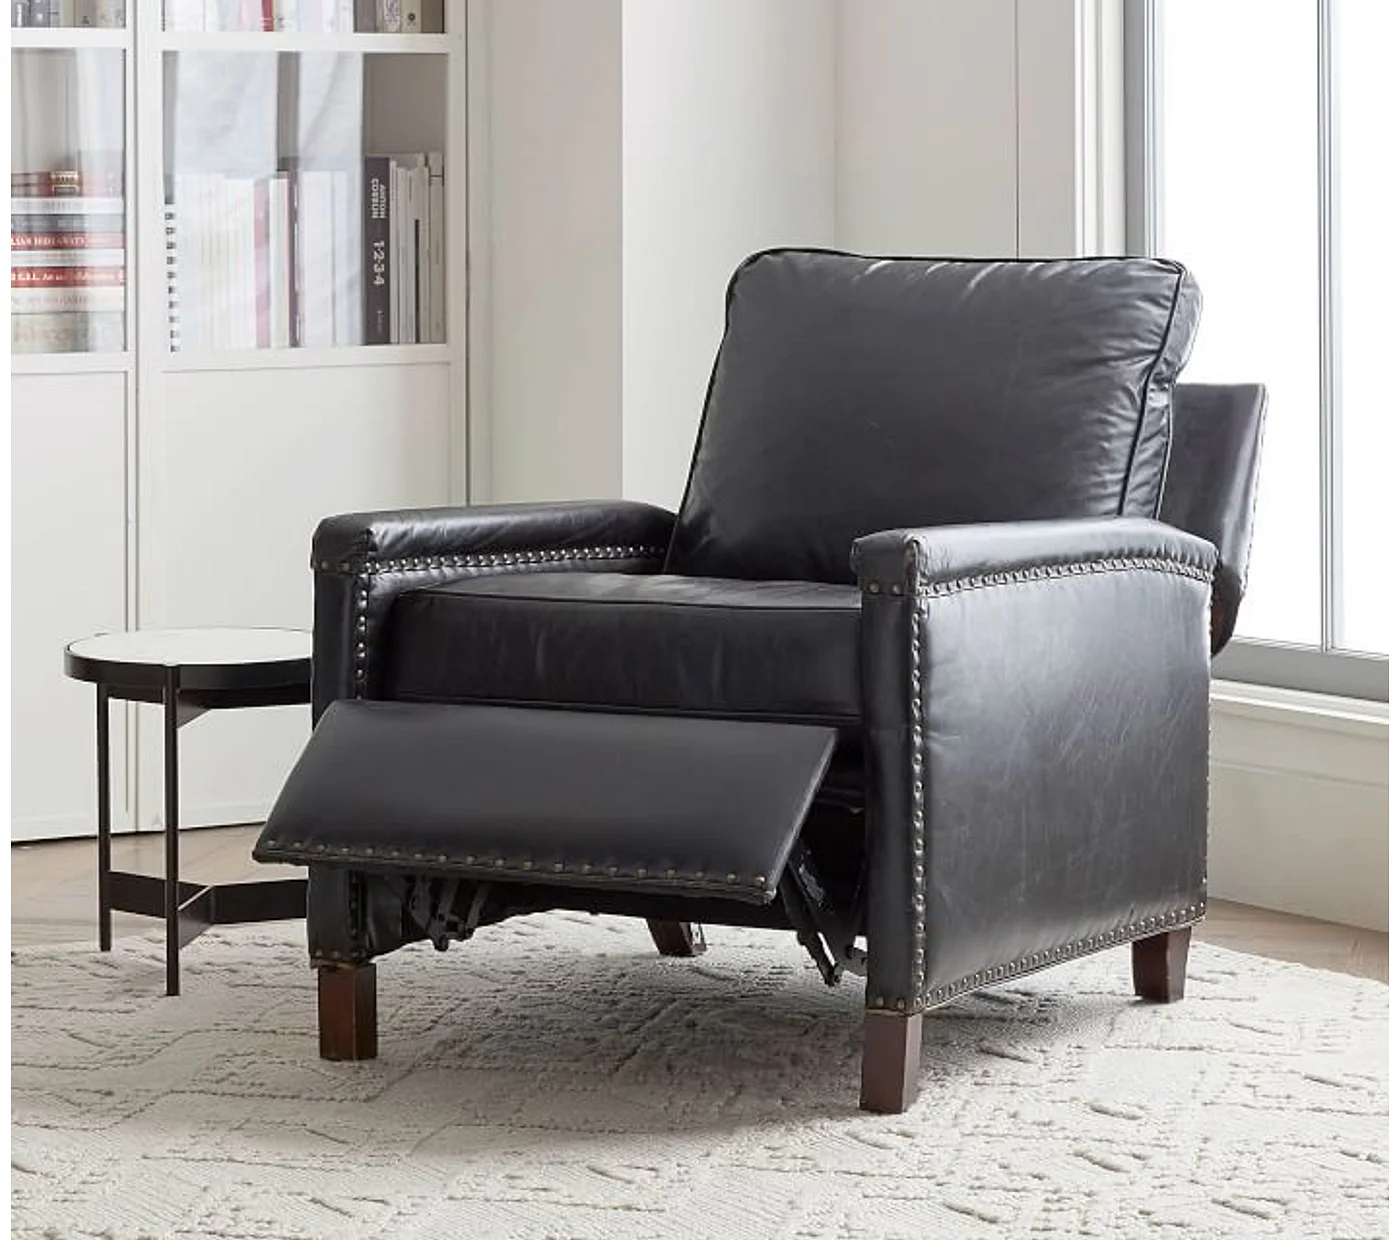 black recliner seat, placed in a hall, a table placed beside the recliner, black coloured recliner